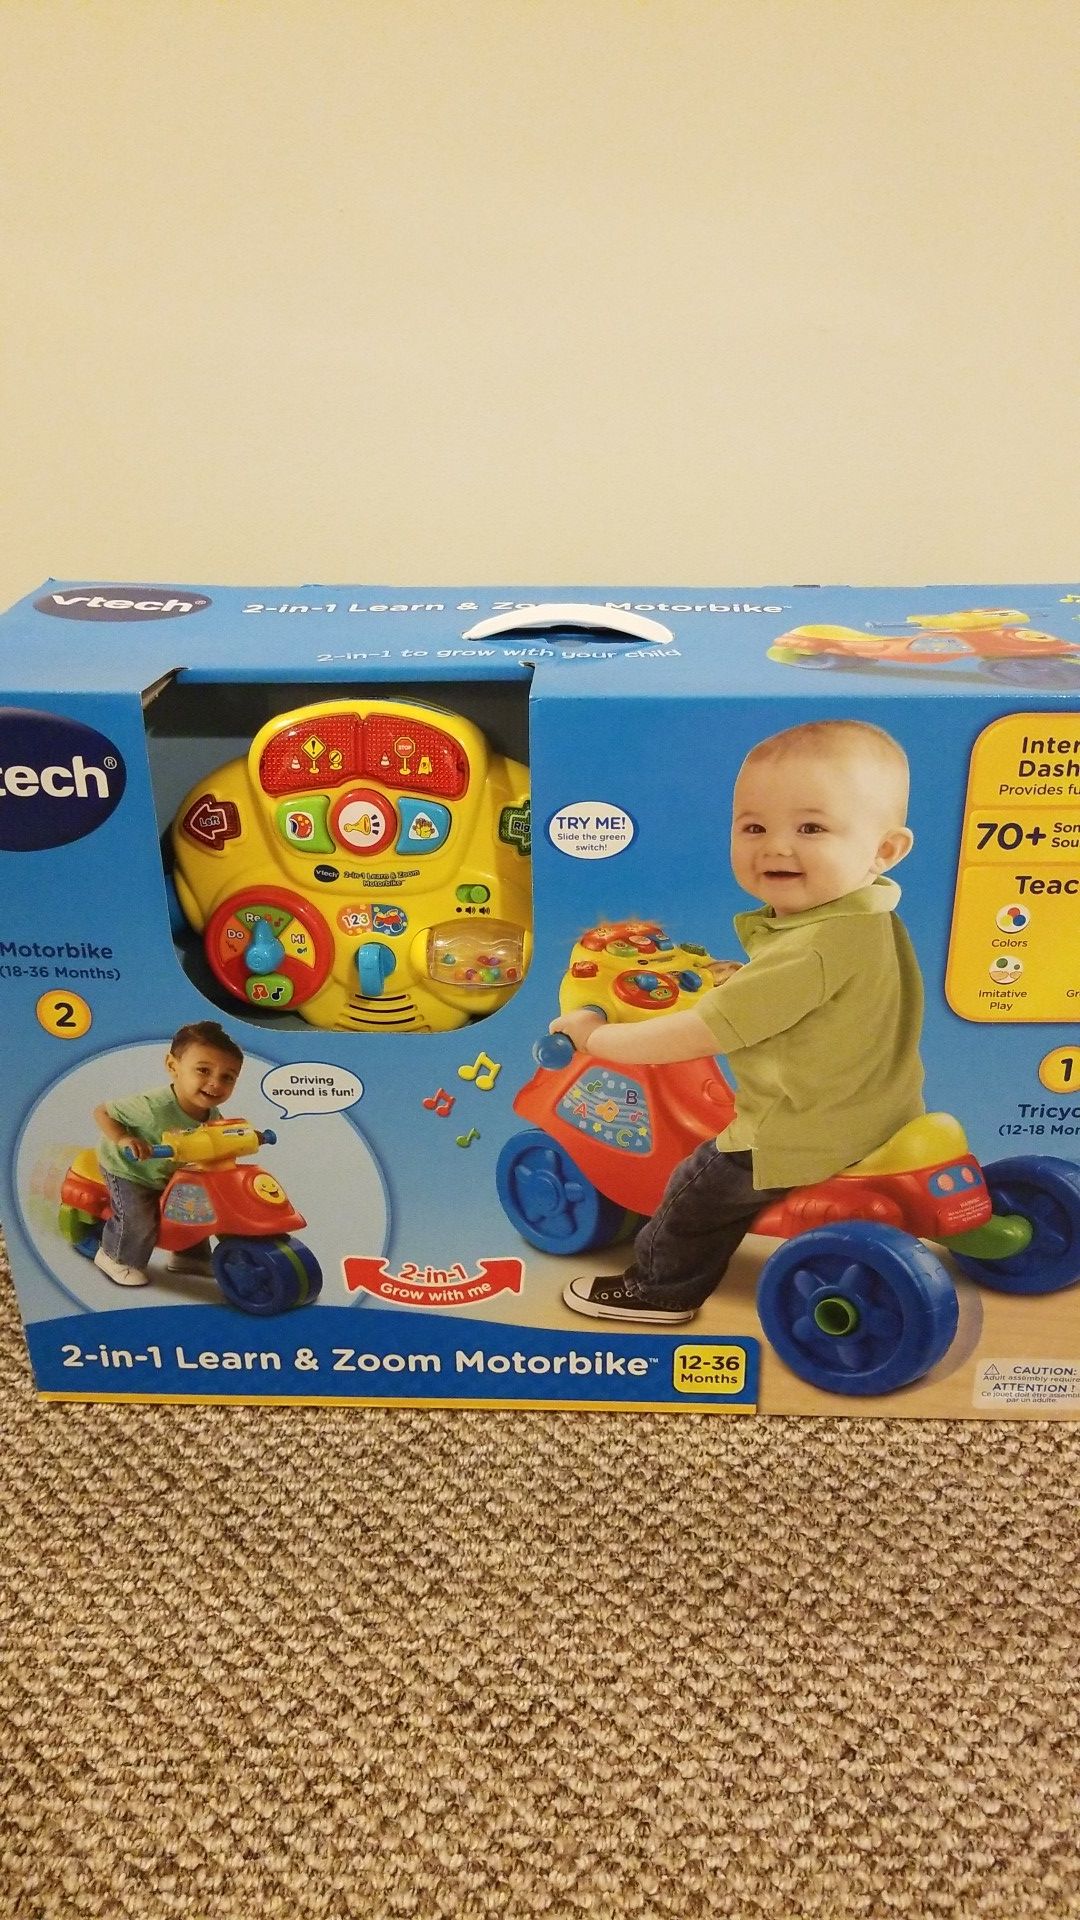 Vtech 2 in 1 learn and zoom motorbike